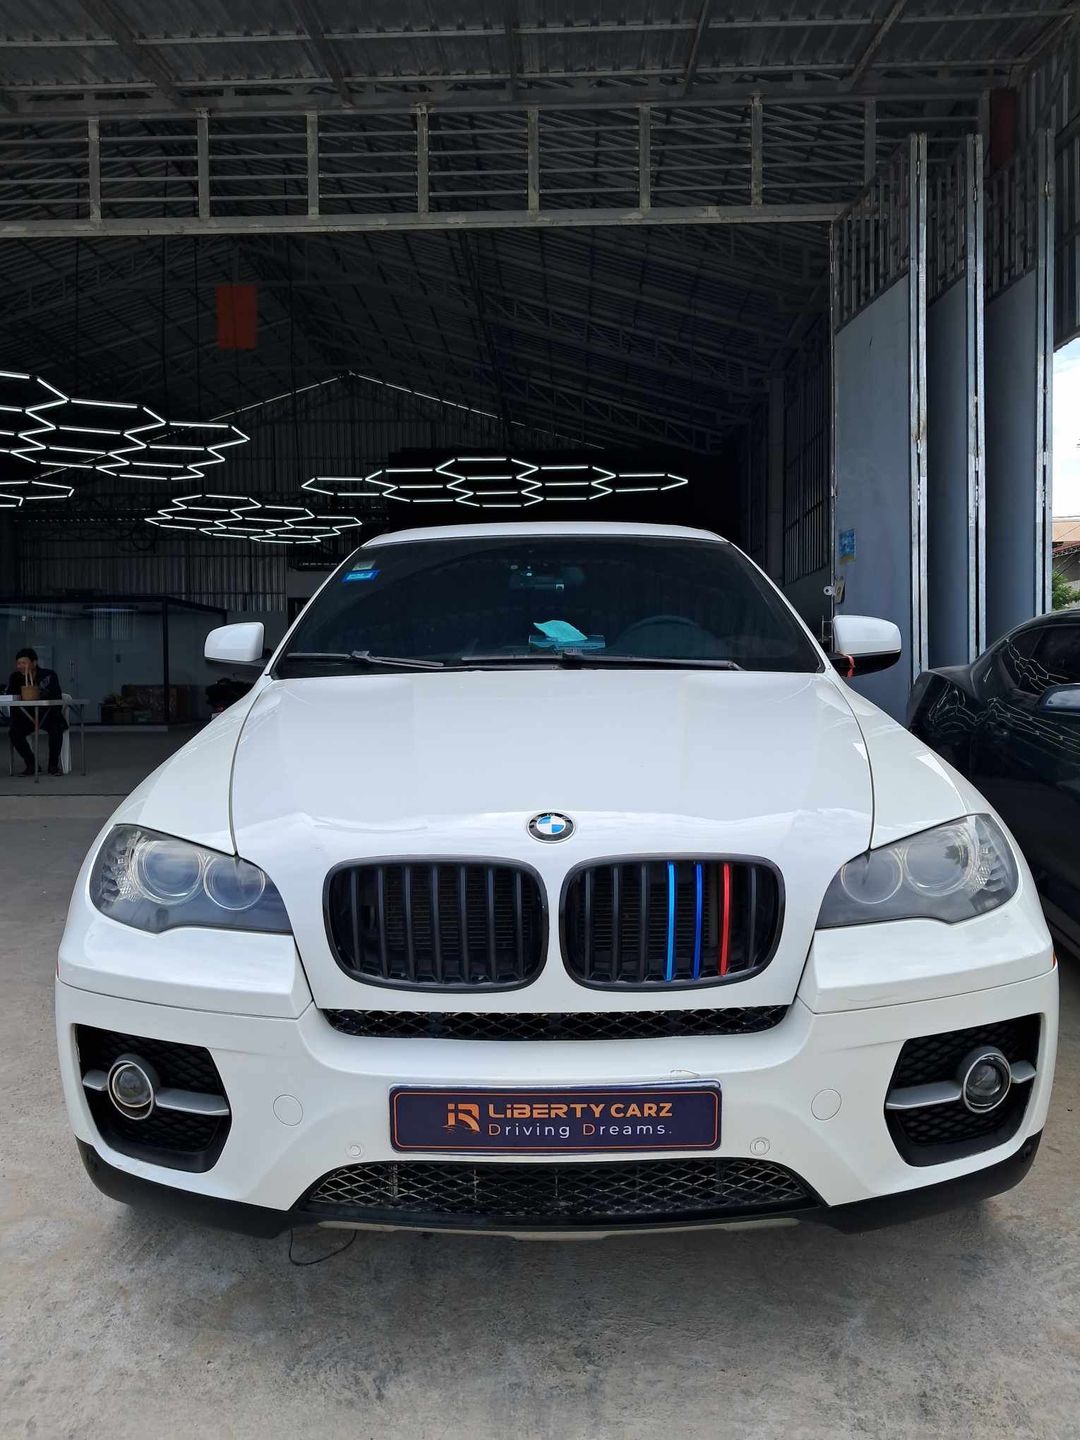 BMW X6 2011forrent